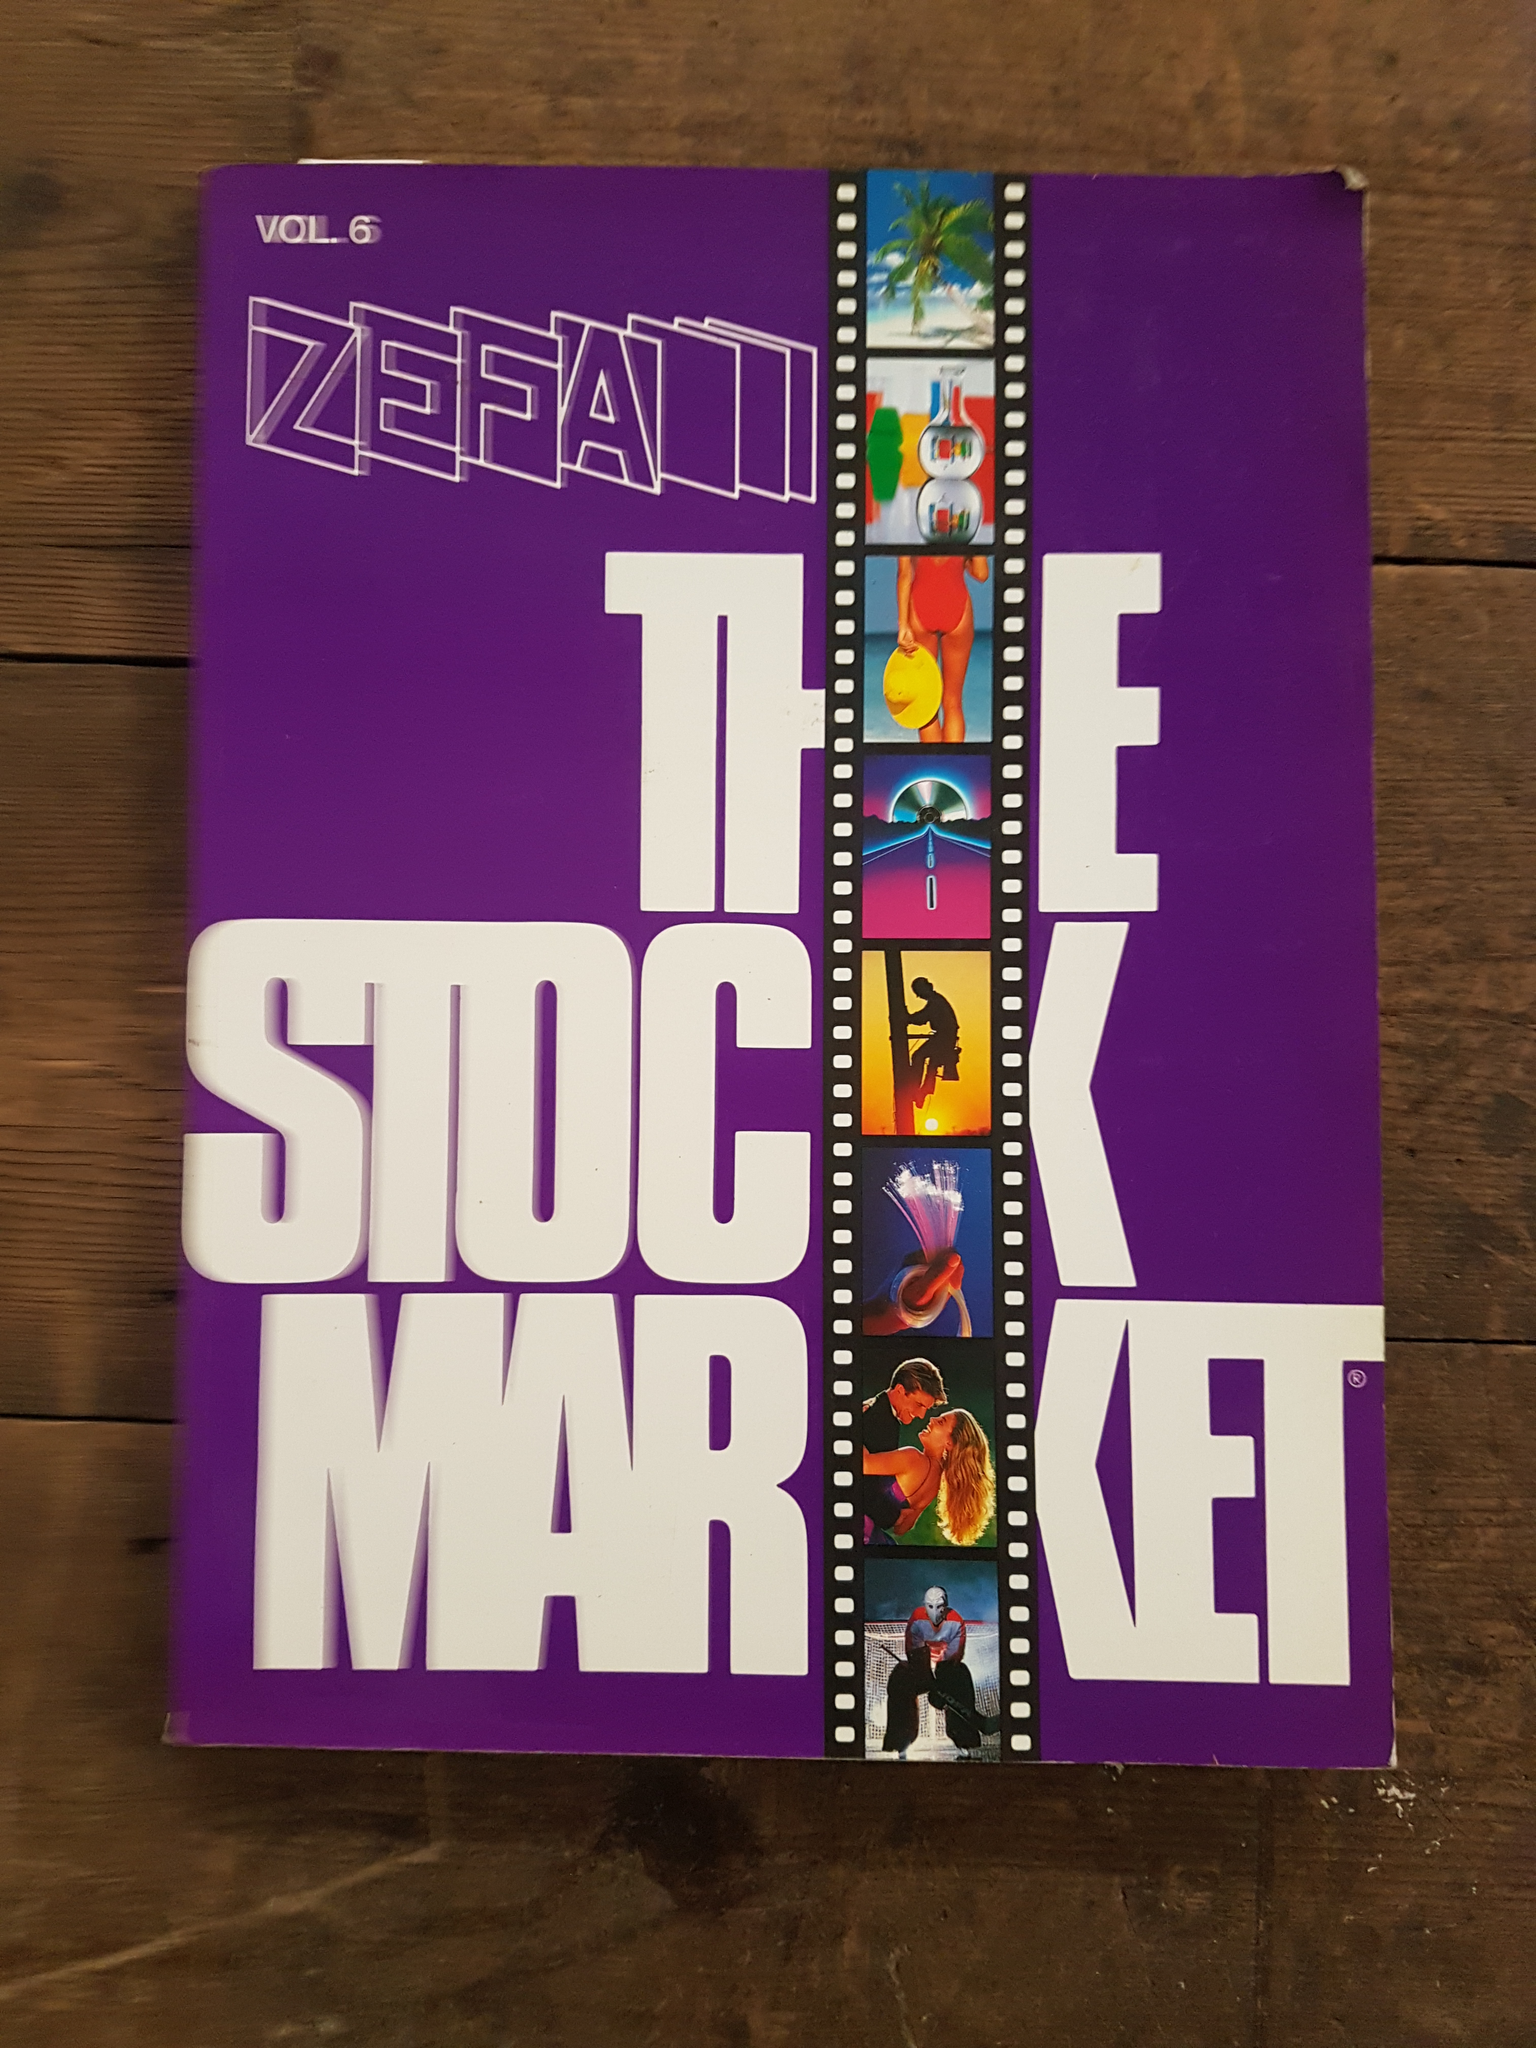 ZEFA's Volume 6 The Stock Market hardback Textbook. Super useful book, Great for photography students or as a refresher! - RewindCameras quality vintage cameras, fully tested and serviced